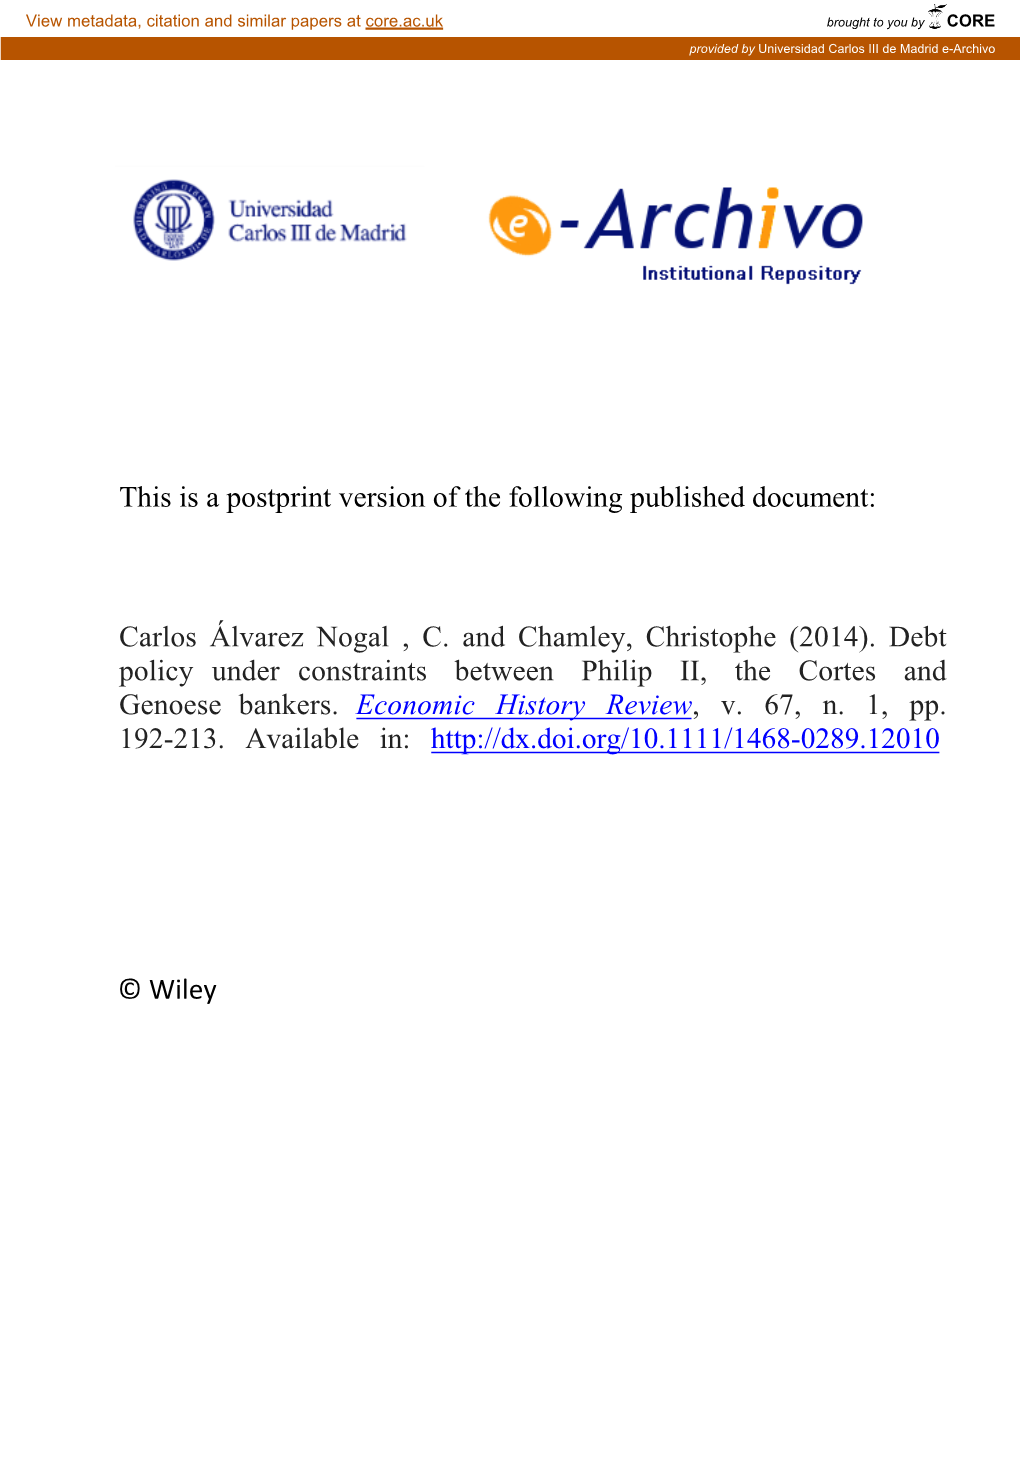 Debt Policy Under Constraints: Philip II, the Cortes, and Genoese Bankers1 by CARLOS ÁLVAREZ-NOGAL and CHRISTOPHE CHAMLEY*